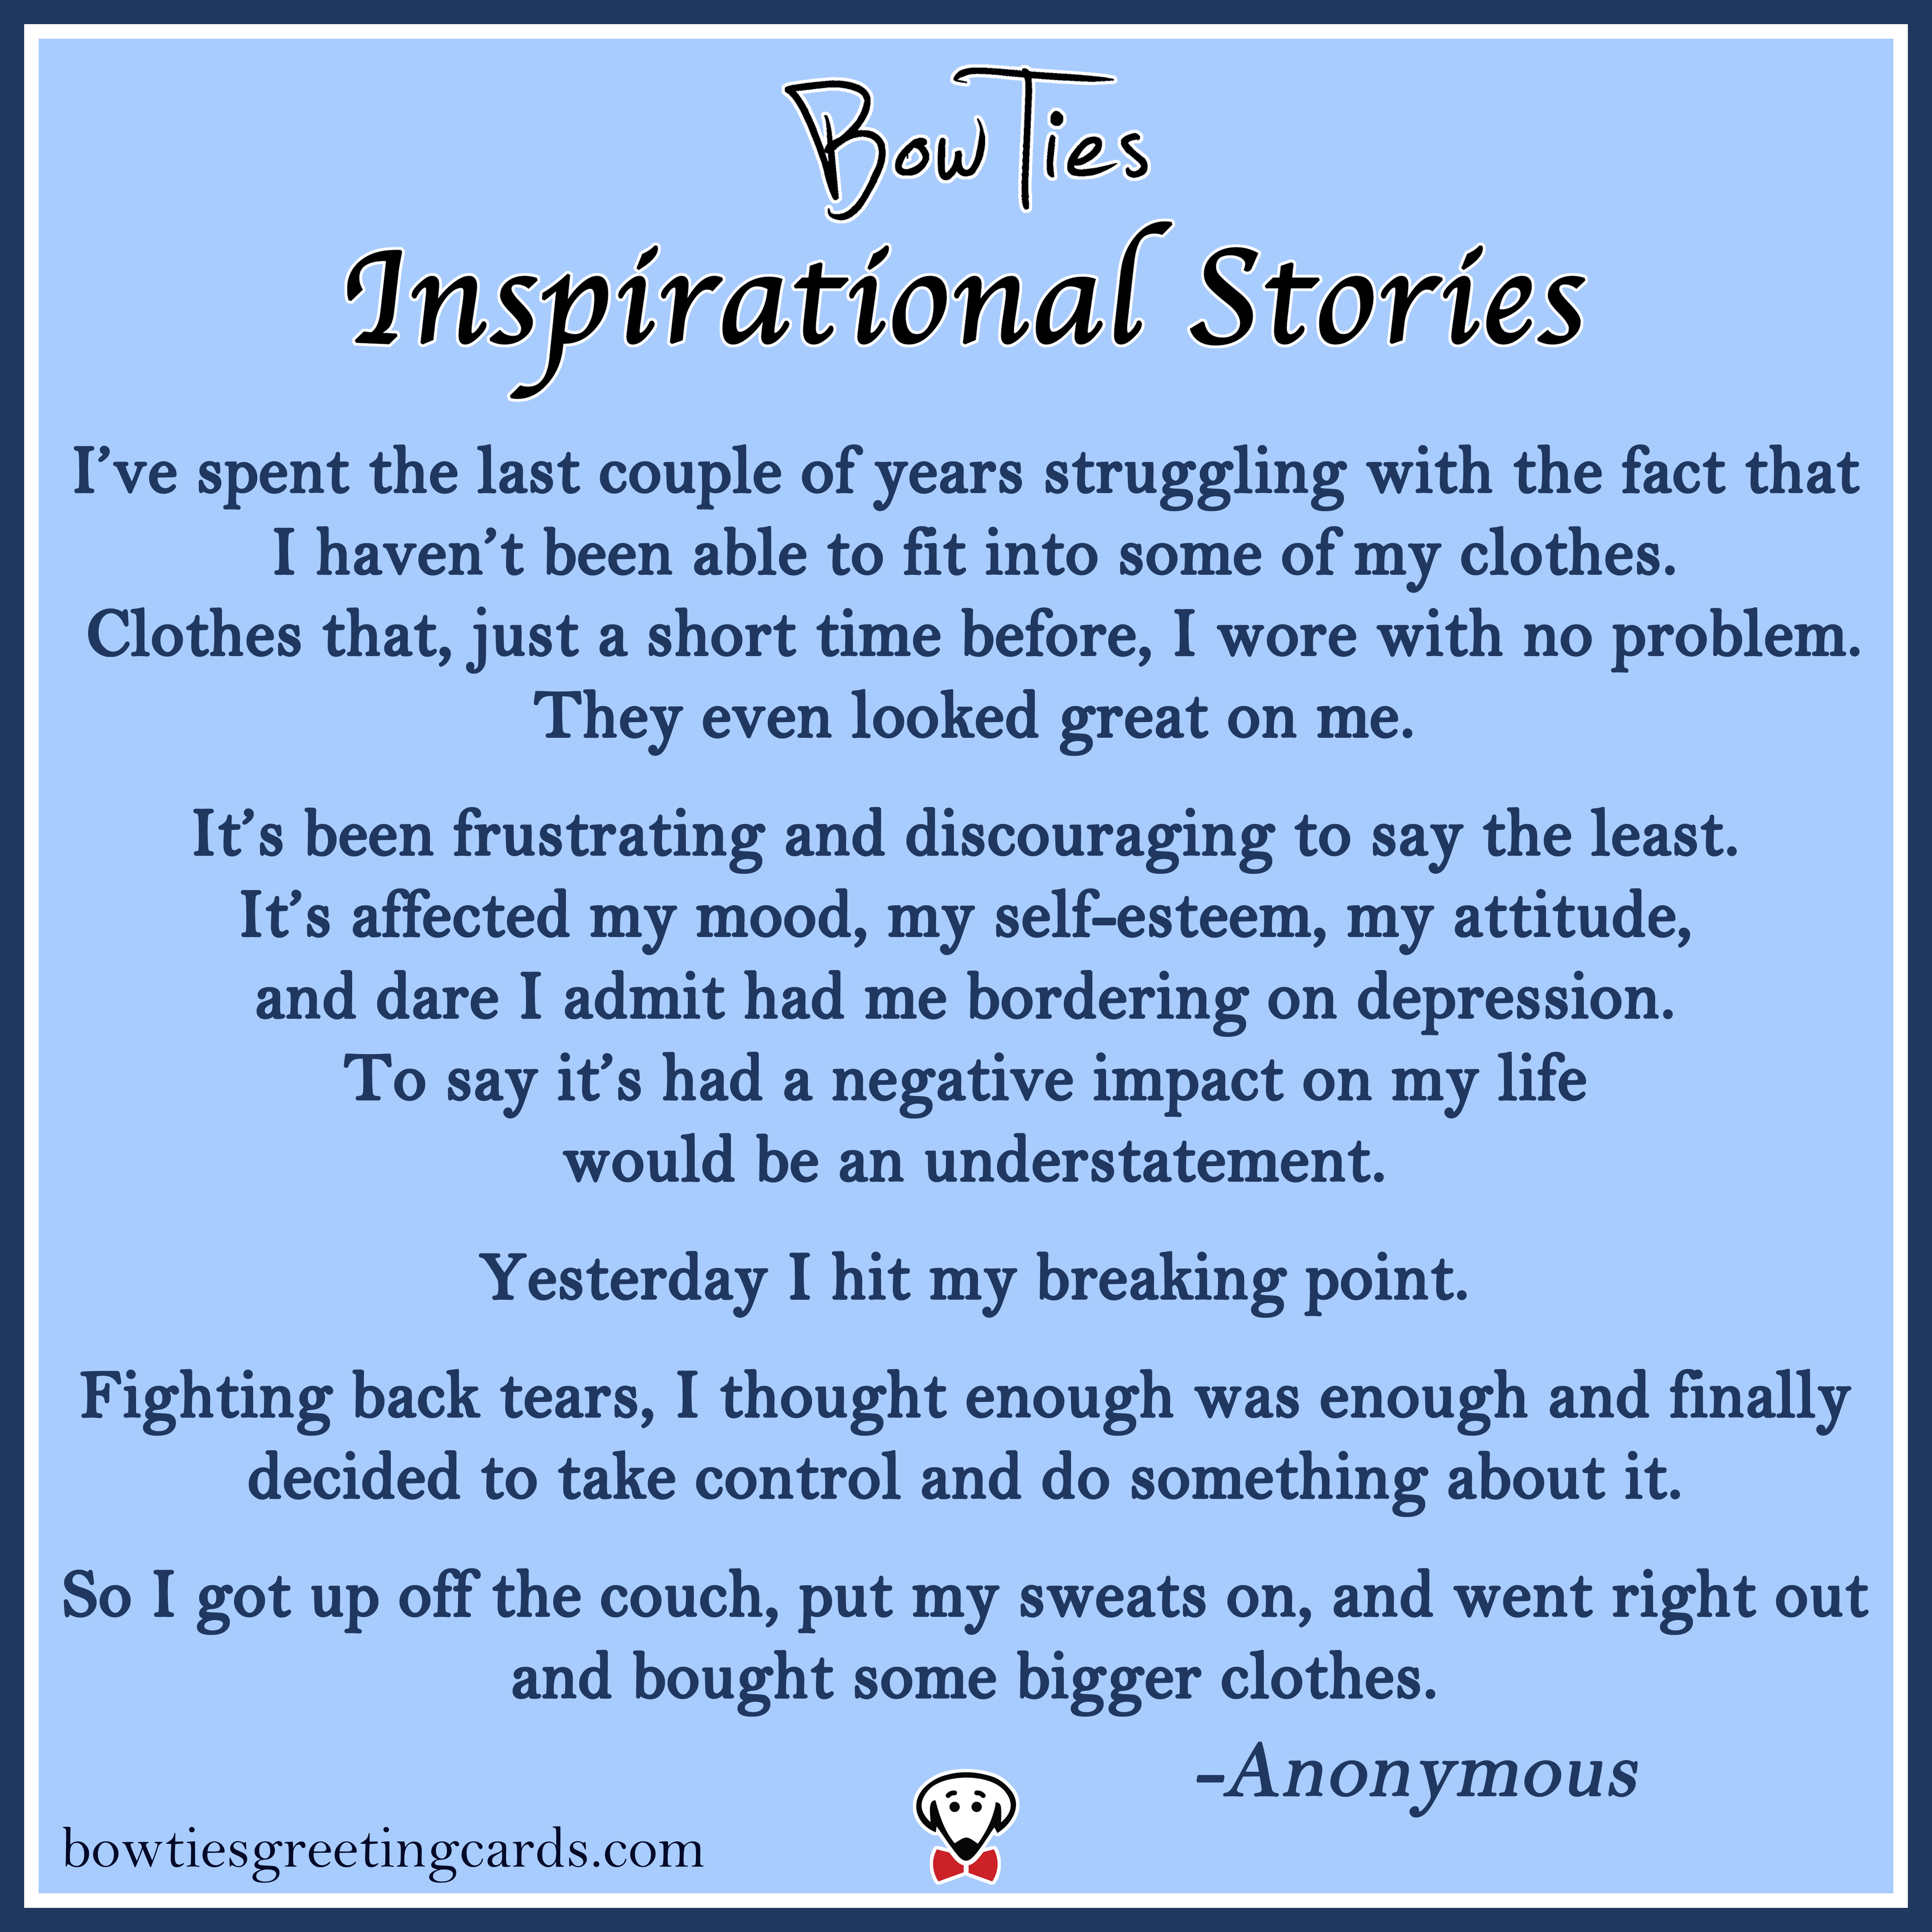 Uplifting Short Inspirational Stories to Brighten Your Day